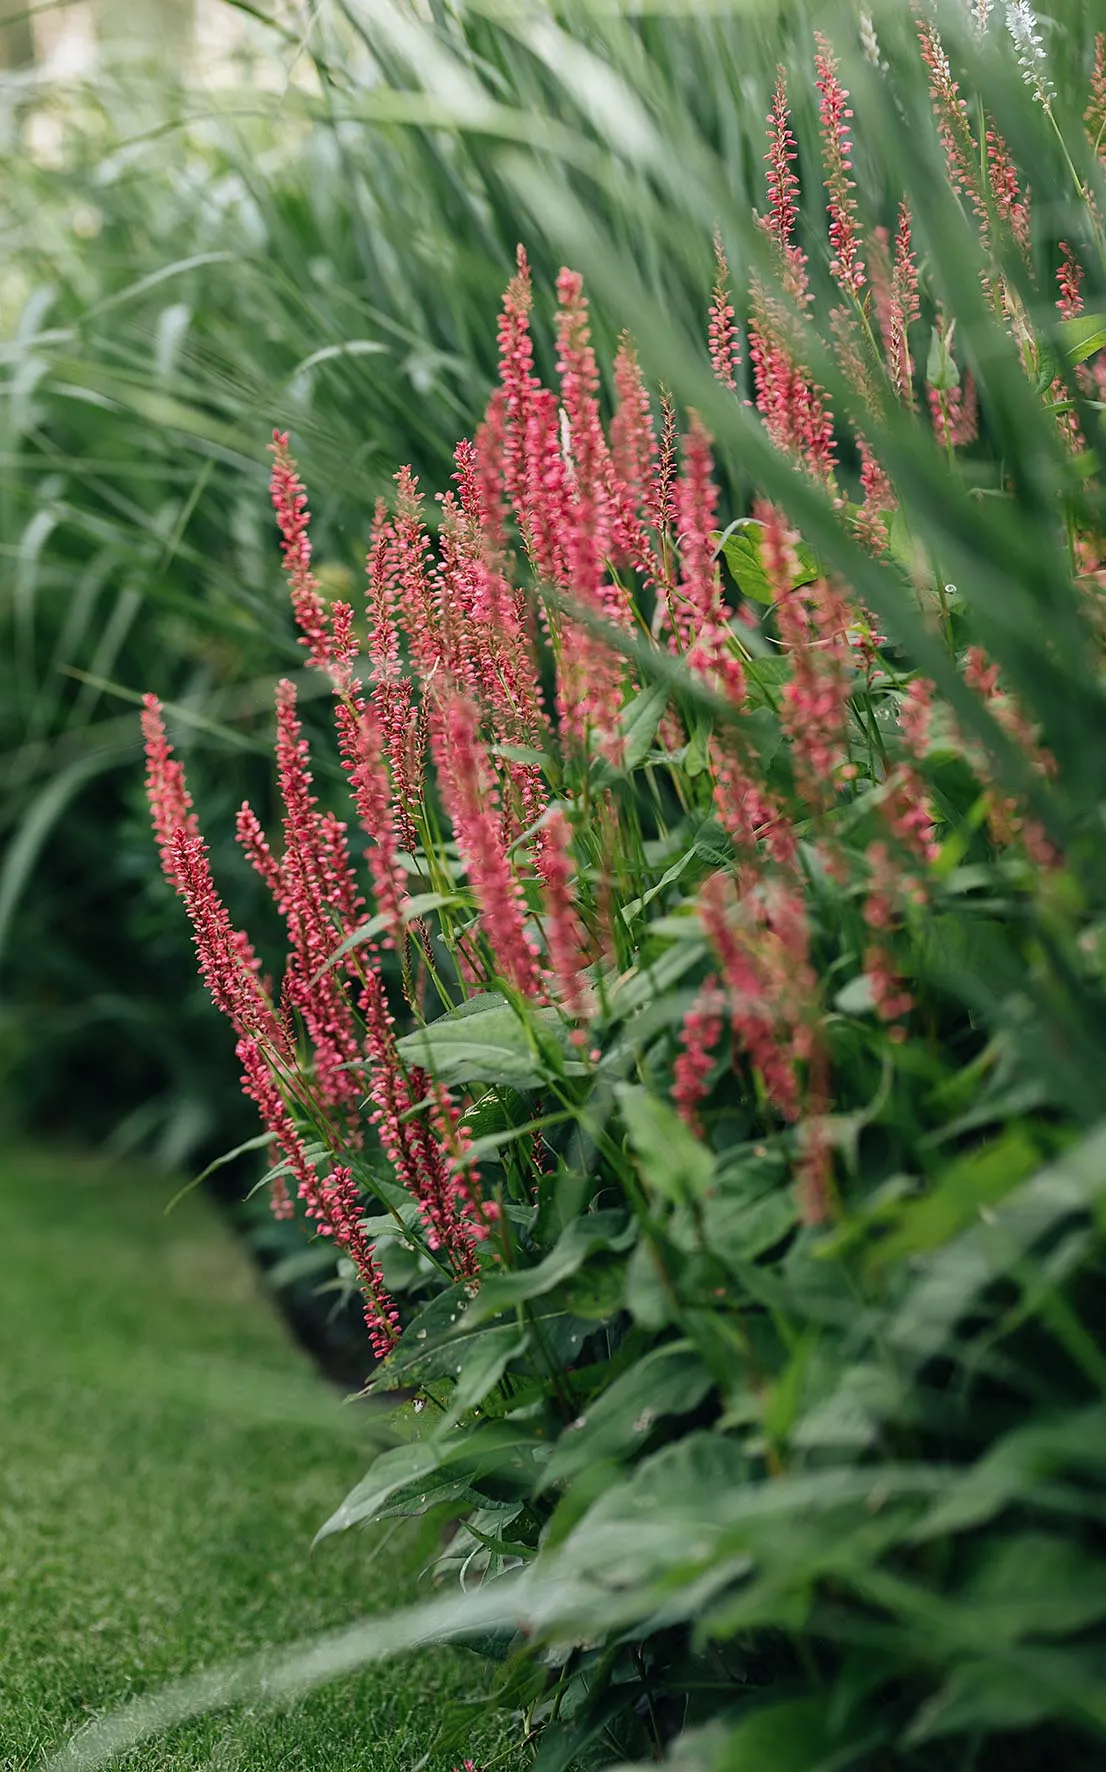 Persicaria amplexicaulis Orange Field (= ‘Orangofield’). Its beguiling, coral-pink flower spikes appear over mounds of foliage. From July to October it buzzes with hoverflies and other pollinators. Requires a moist soil. 90cm.